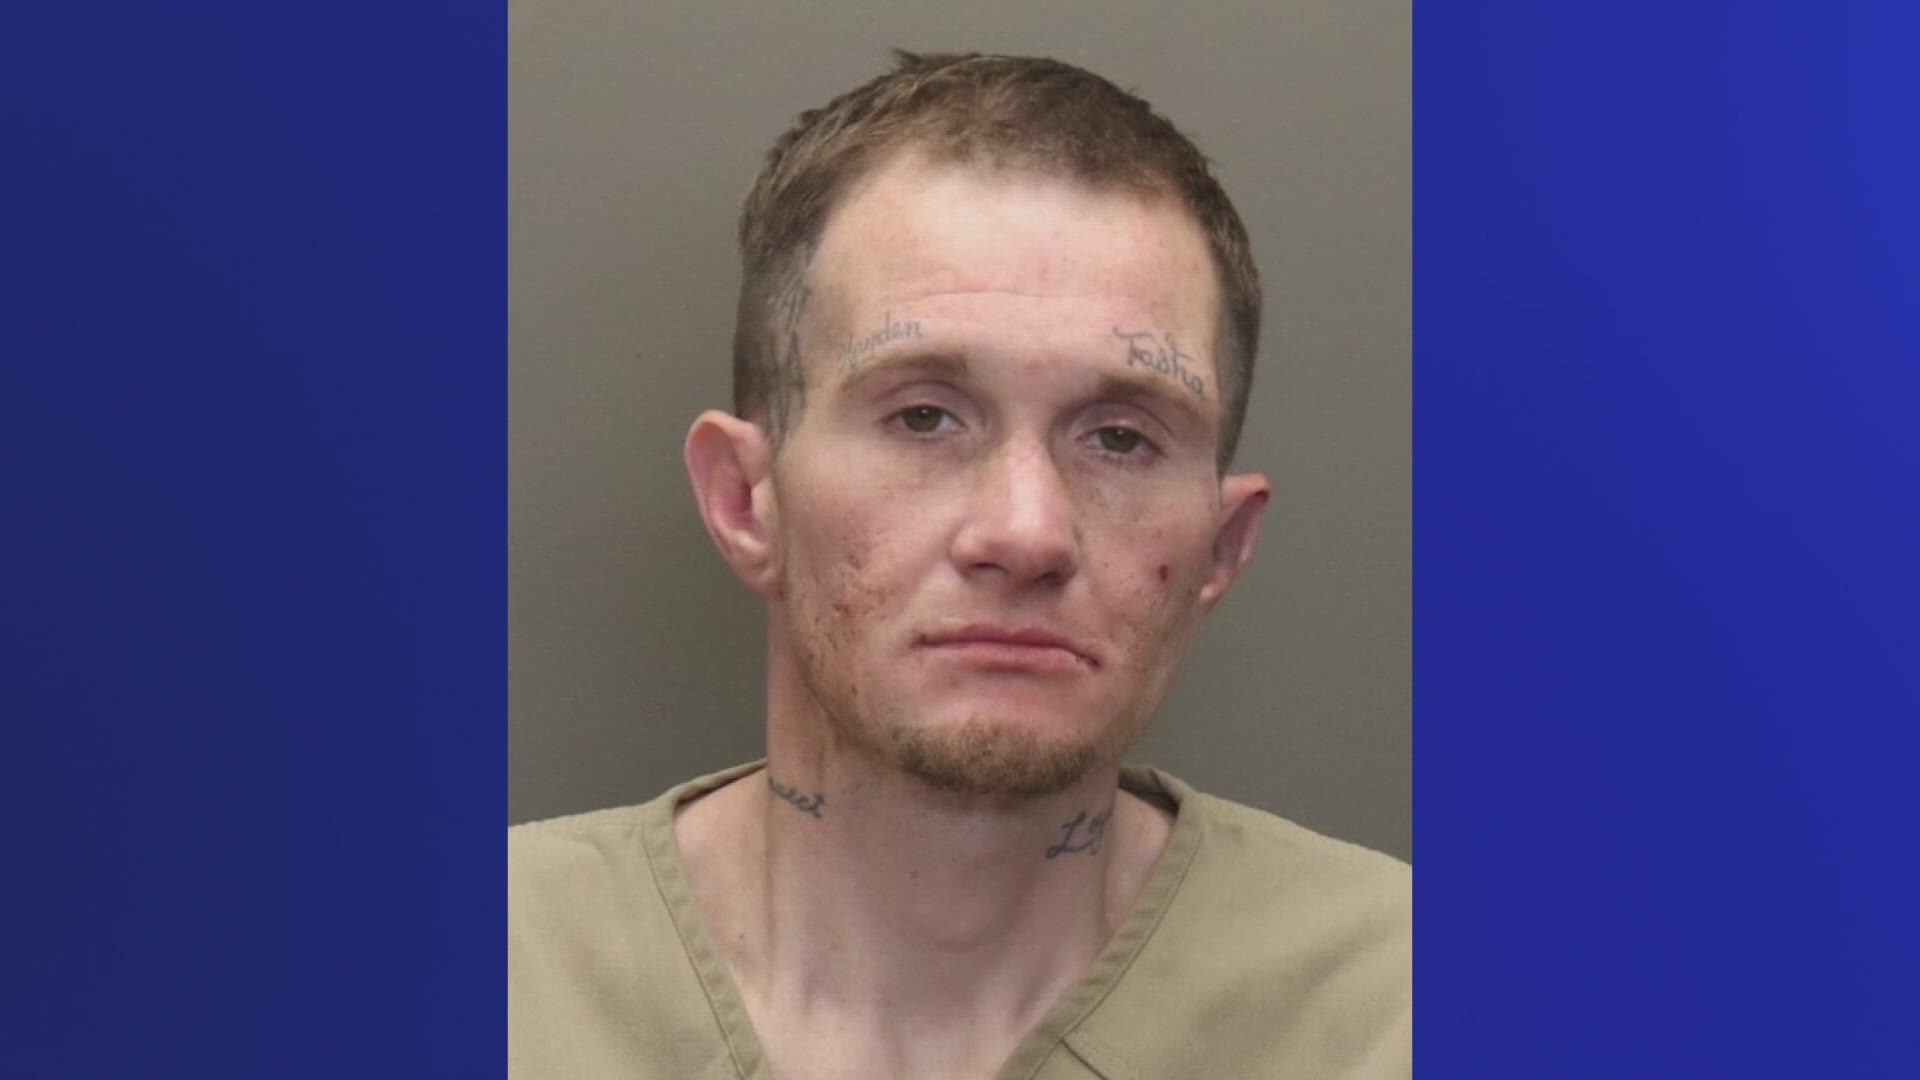 33-year-old Jacob Laurence is considered armed and dangerous.